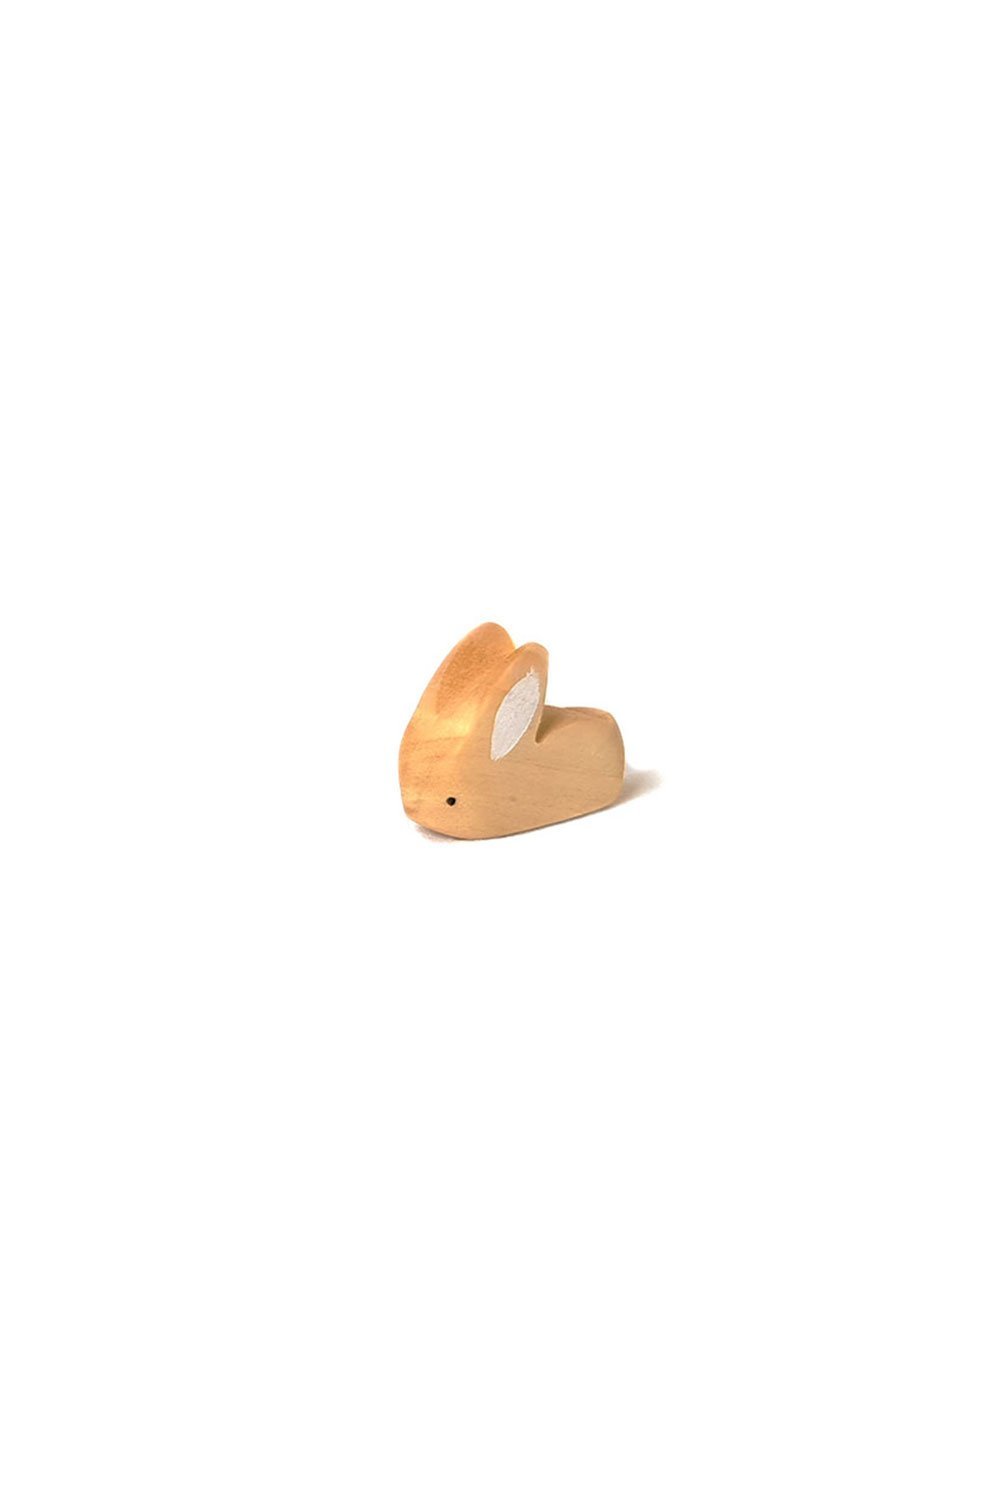 Brin d'Ours Handmade Wooden Baby Rabbits - Wood Wood Toys Canada's Favourite Montessori Toy Store